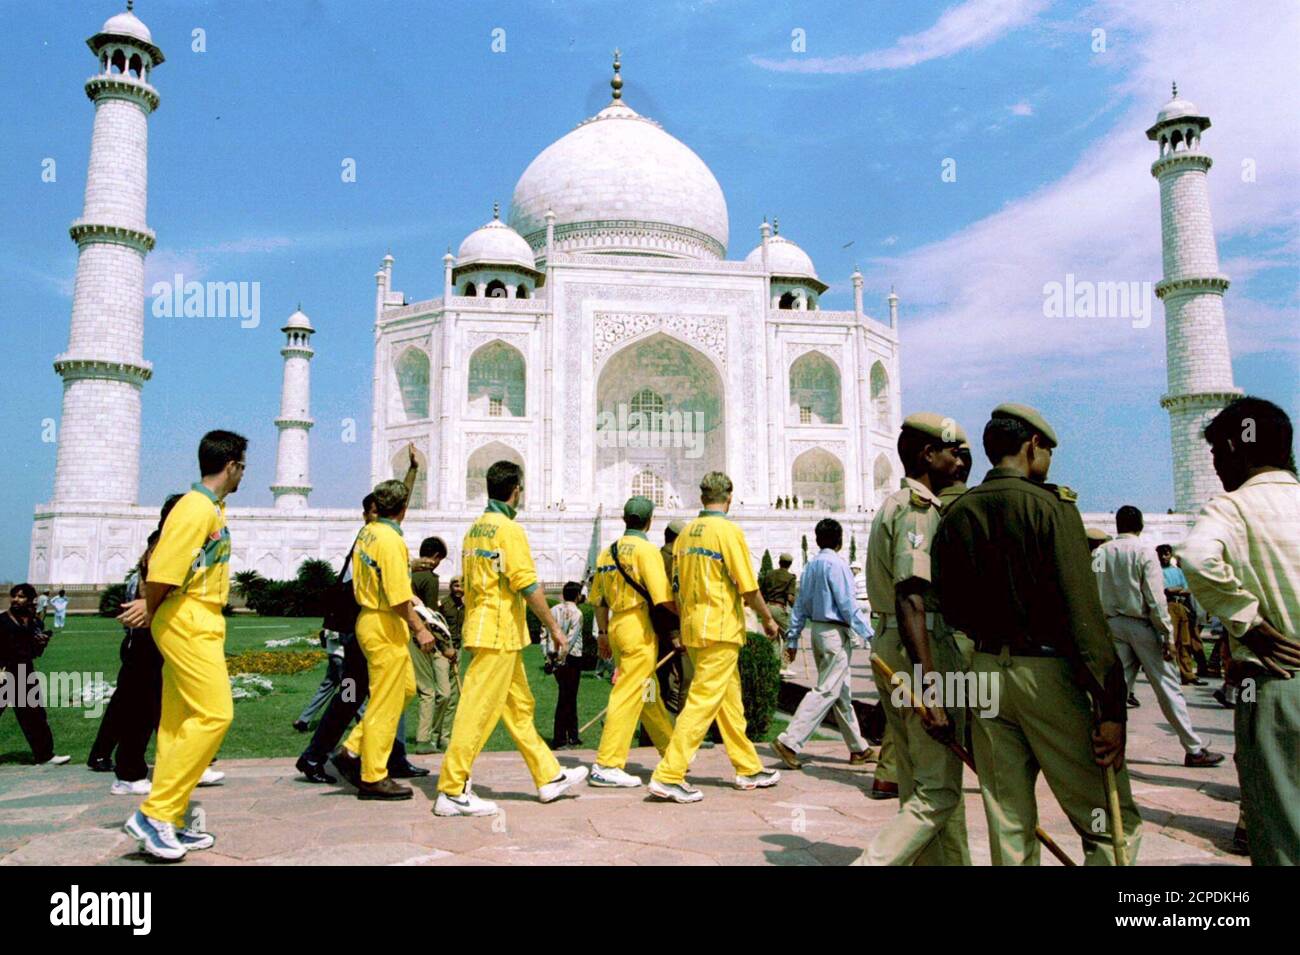 Australian cricket team members walk around the Taj Mahal in Agra March 7,  amid continuing tight security. Australia will play New Zealand in the  quarter-finals of the World Cup on March 11